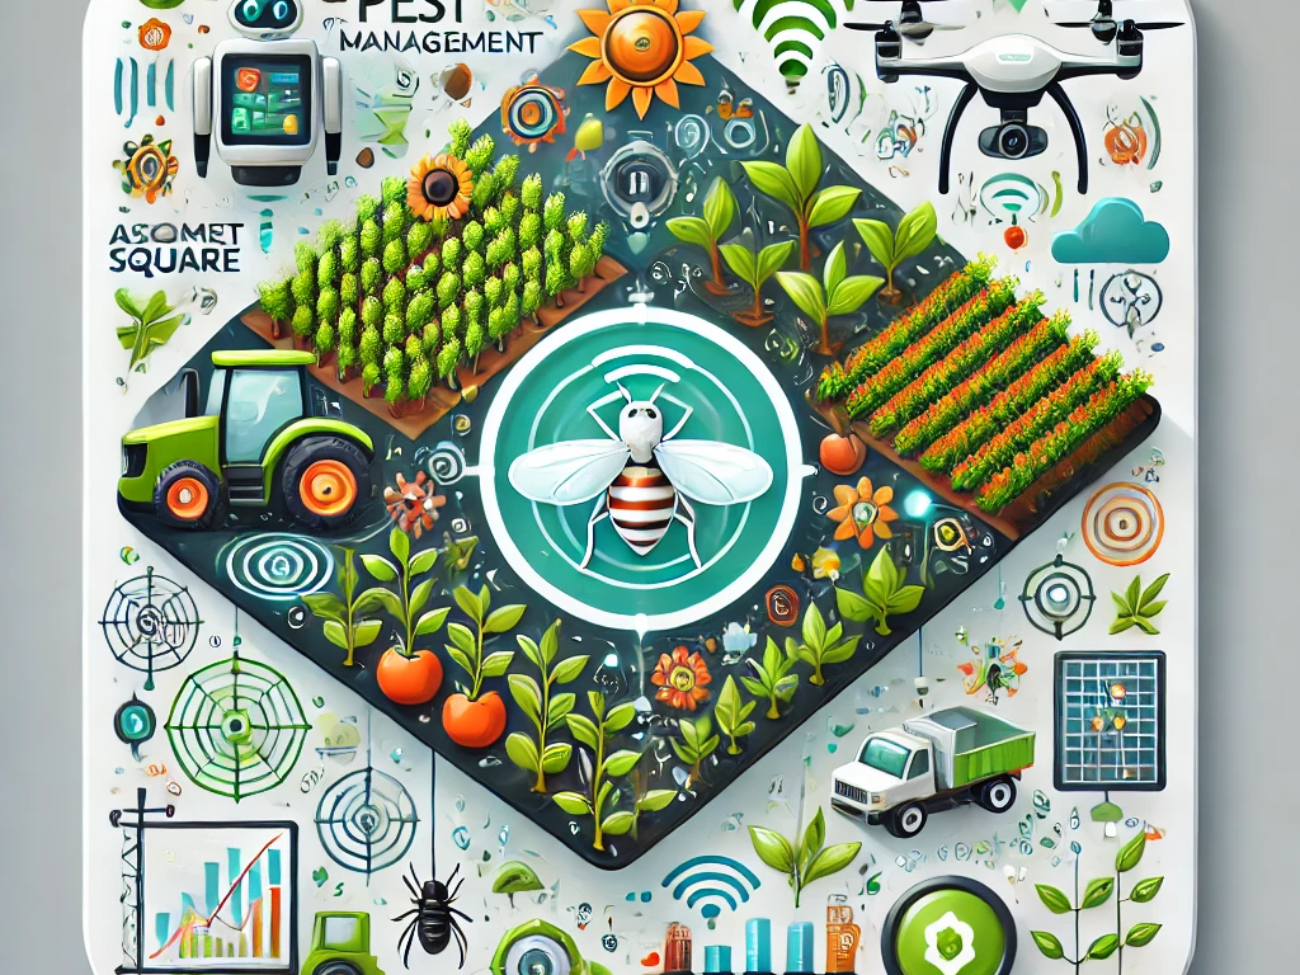 DALL·E 2024-06-21 17.34.55 - A smart square illustration depicting autonomous pest management in agriculture. Include elements such as drones, sensors, and robots monitoring crops